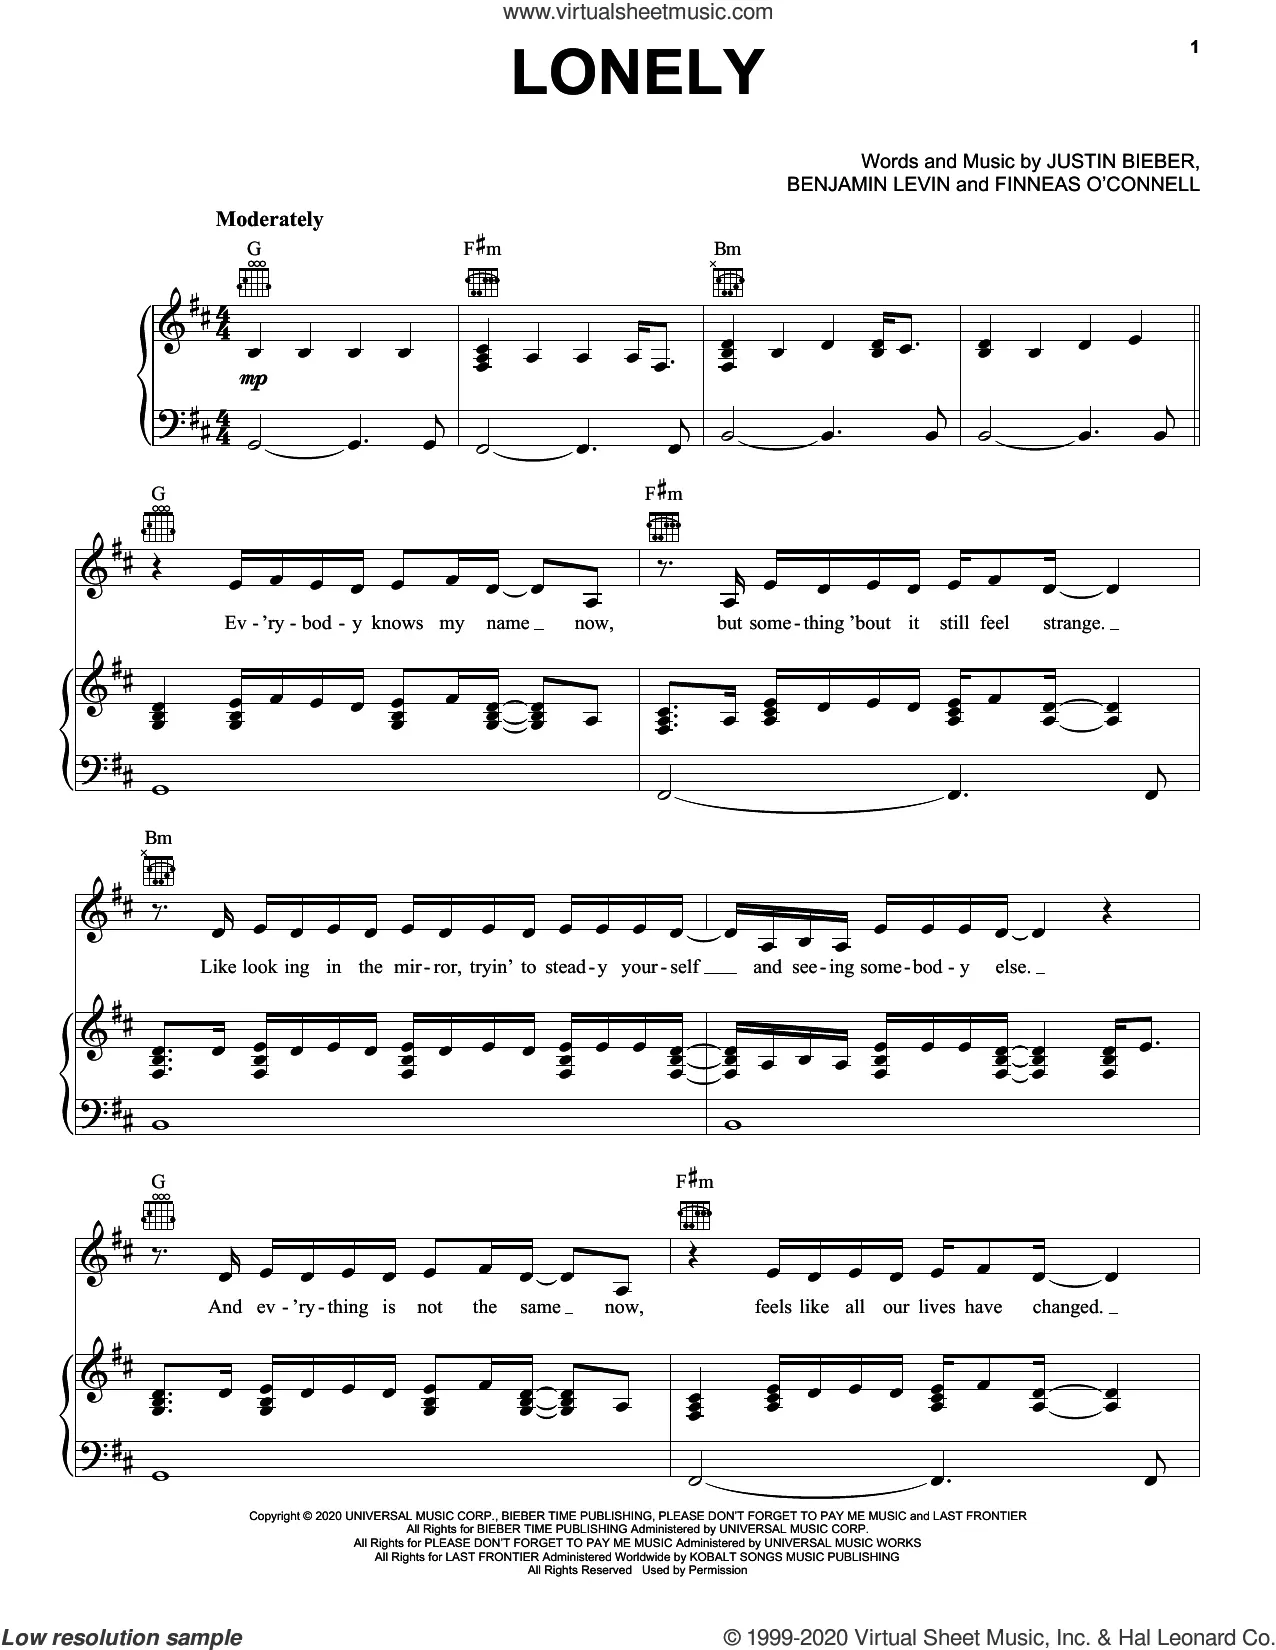 Ghost by Justin Bieber - Piano, Vocal, Guitar - Digital Sheet Music